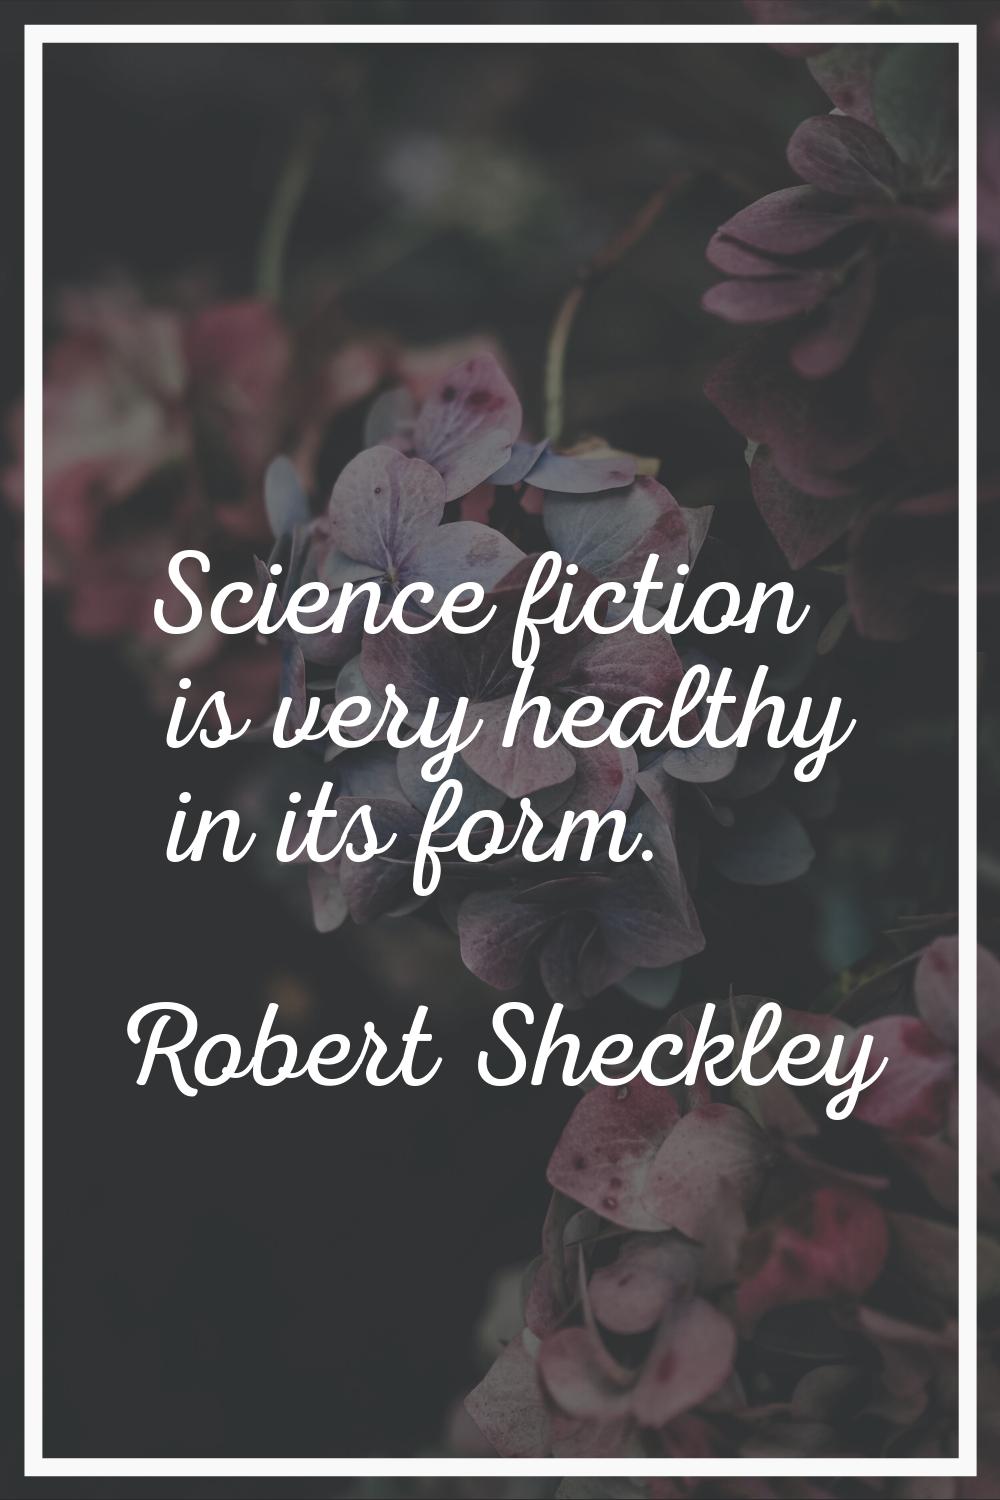 Science fiction is very healthy in its form.